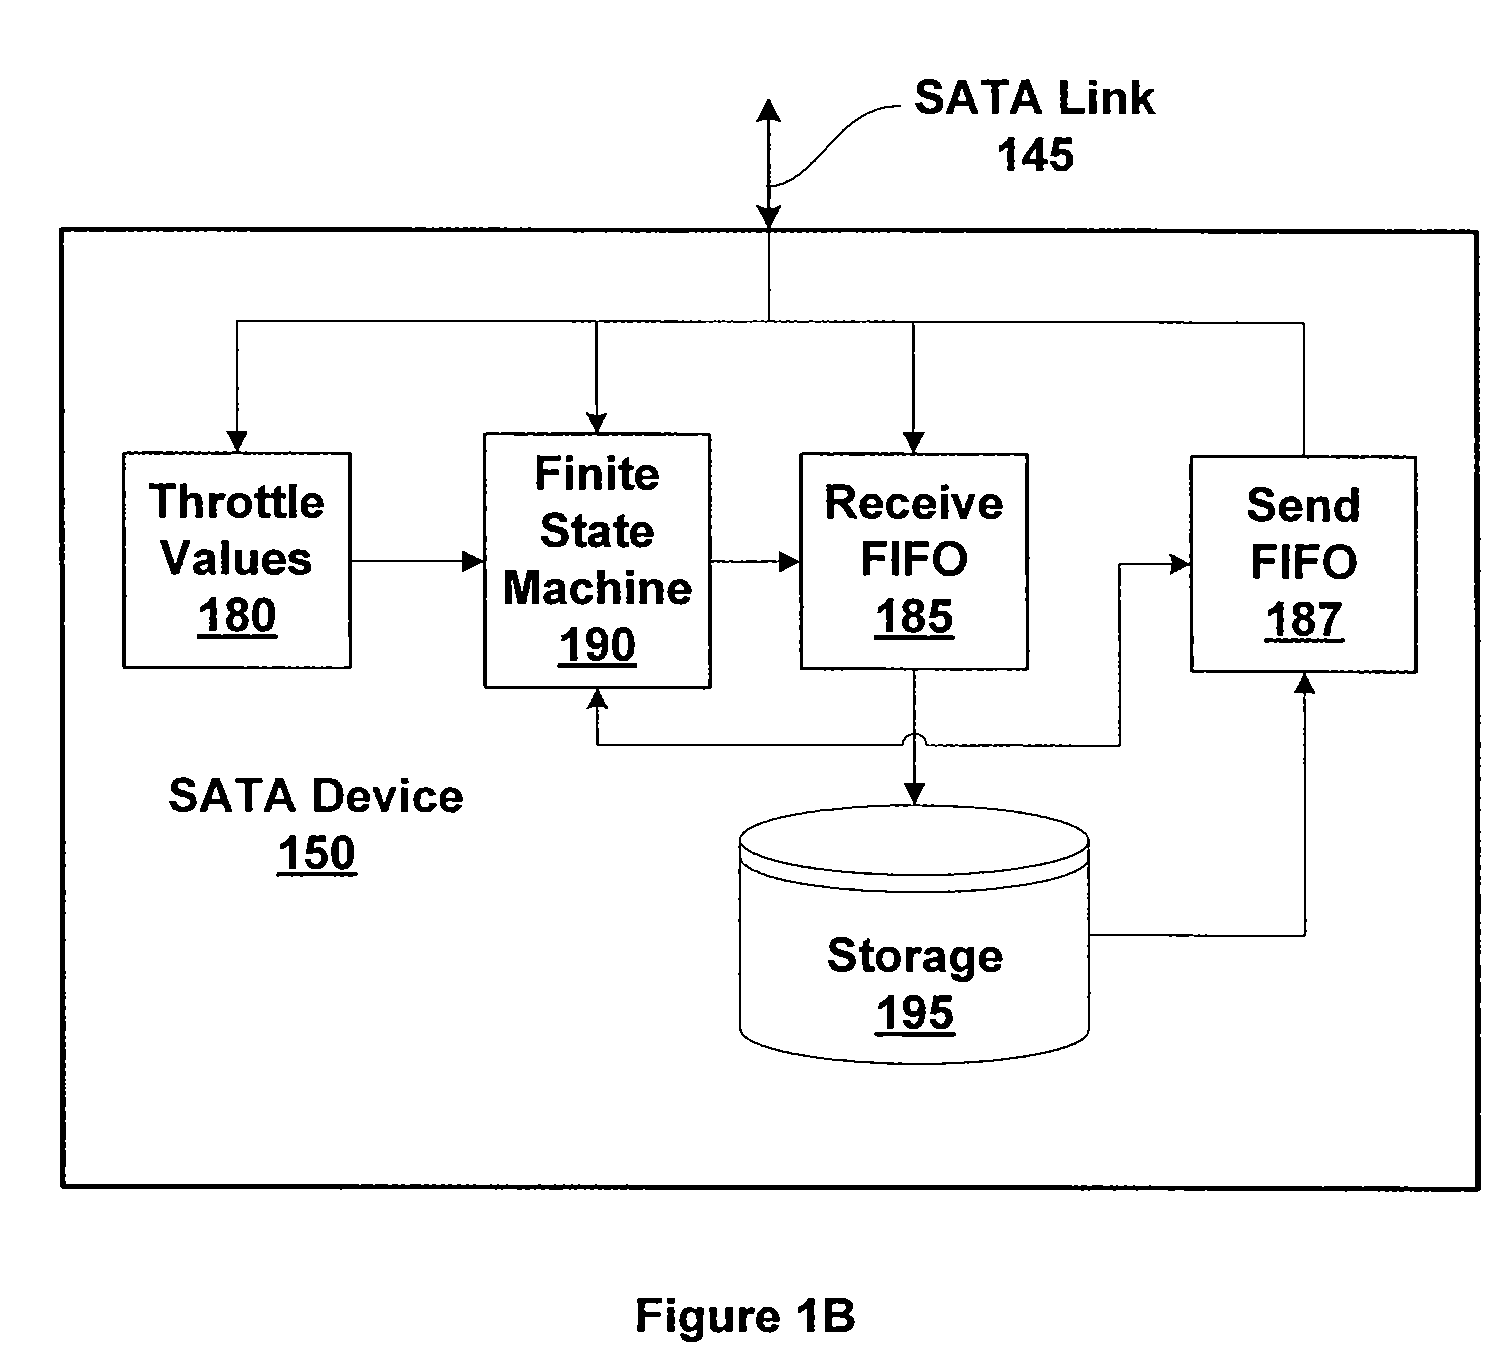 Control data transfer rates for a serial ATA device by throttling values to control insertion of align primitives in data stream over serial ATA connection